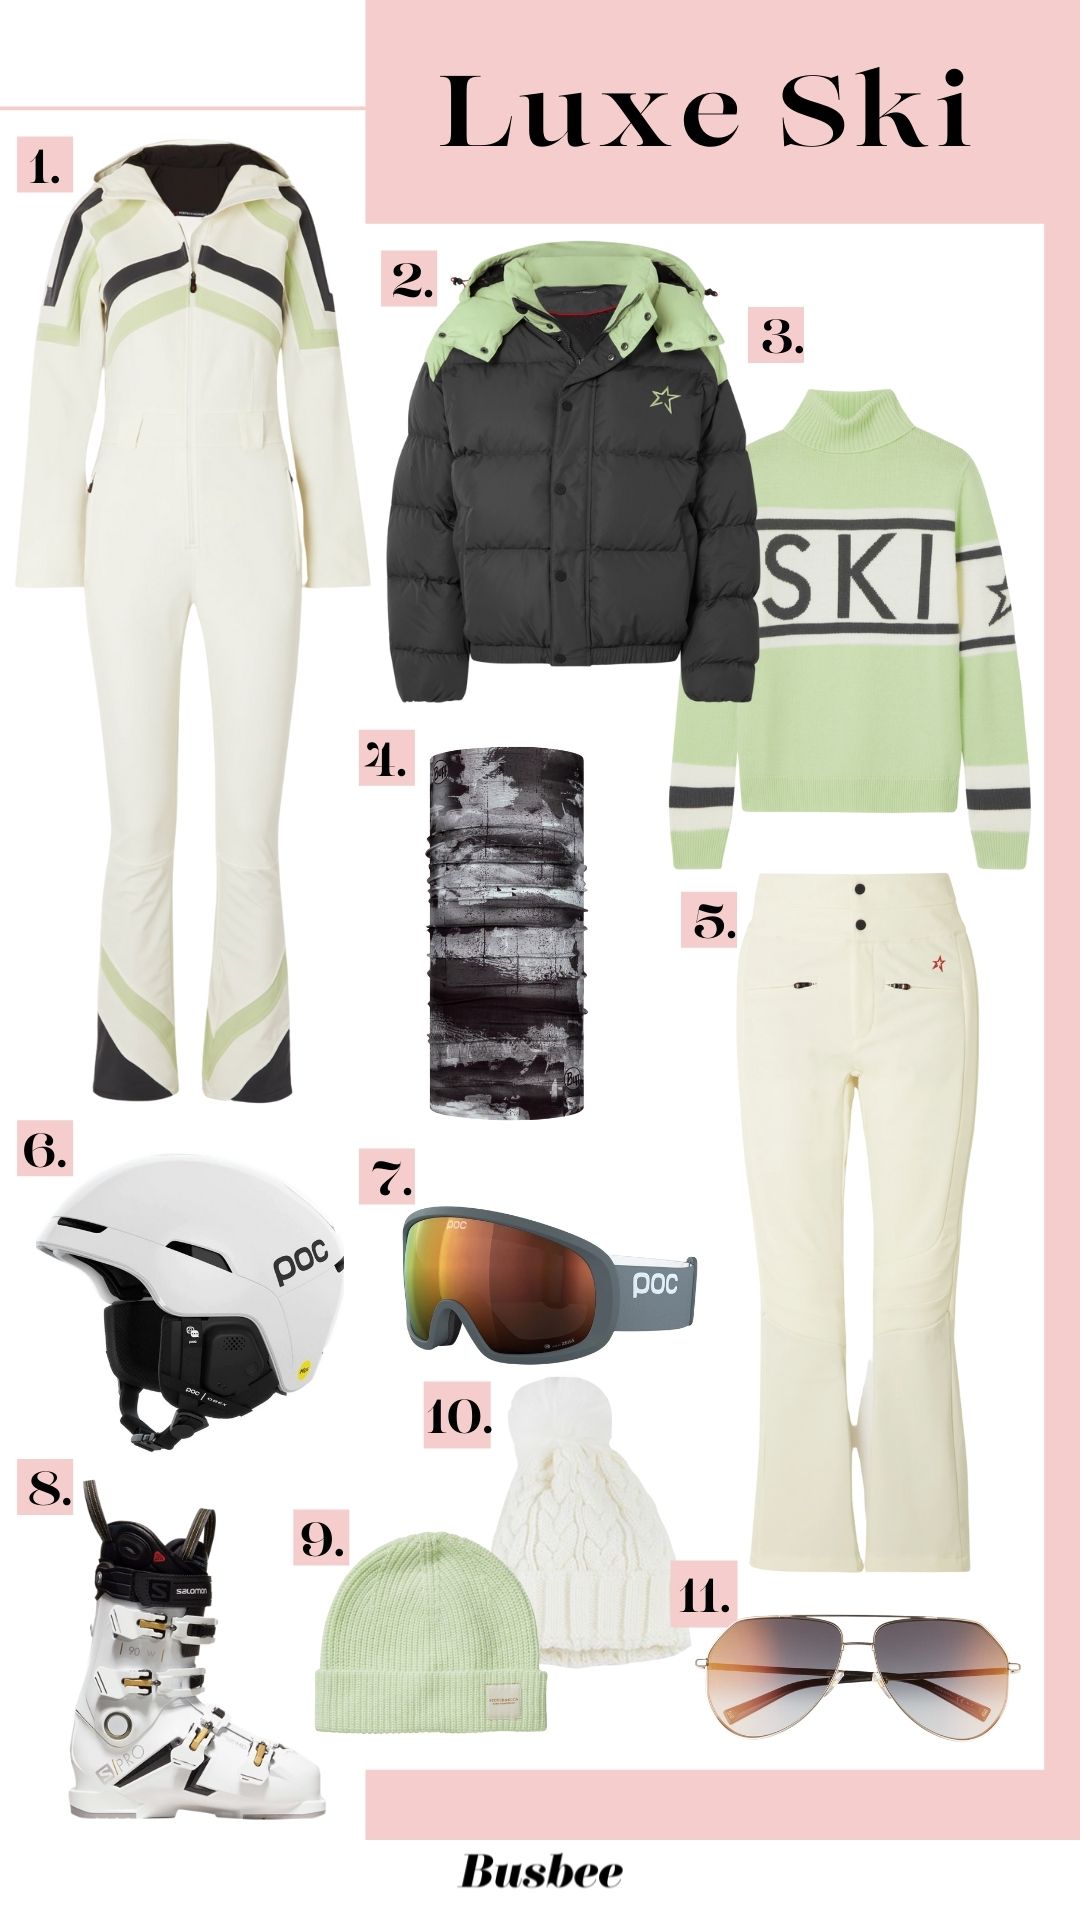 luxury ski clothing, how to look luxe on the slopes, how to dress for skiiing, luxury ski gear, chic ski clothing, chic ski gear, skiing outfit, perfect moment, skiing tips, erin busbee, telluride, colorado